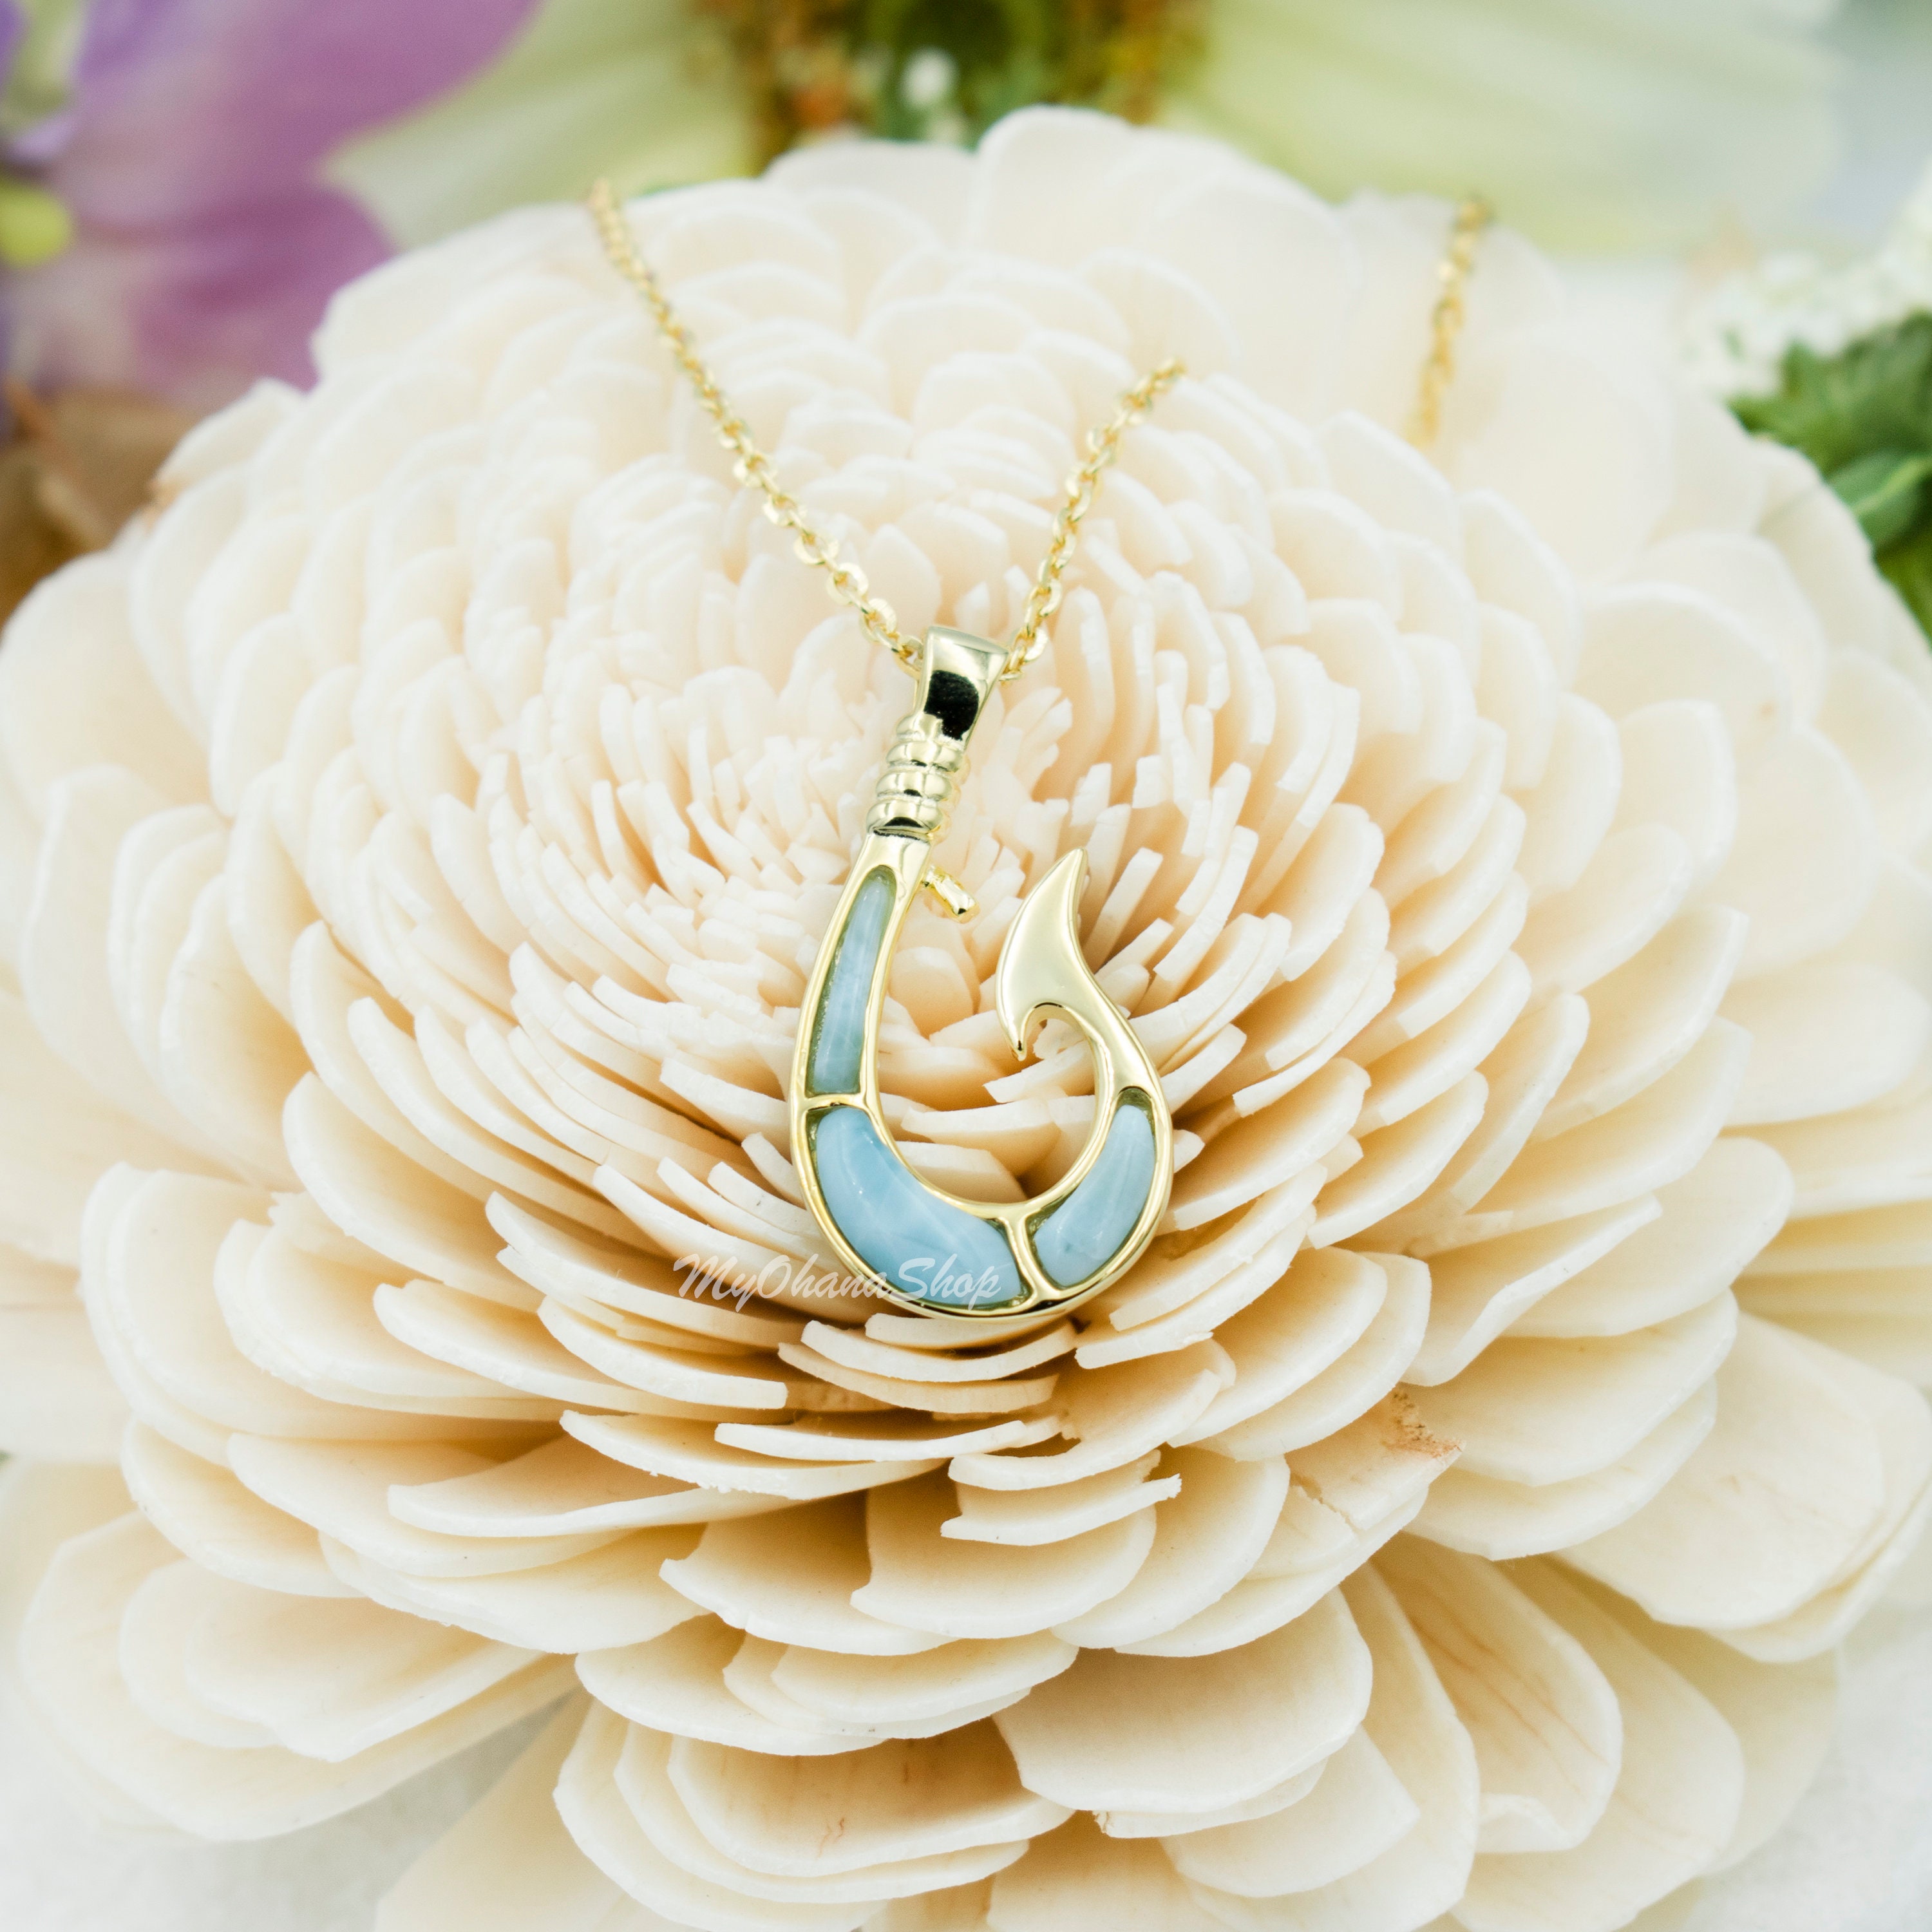 14K Gold Plated Silver Larimar Fish Hook Necklace for Men, Women, Boys,  Girls. Tropical Sea Life, Hawaiian Pendant Jewelry. Gift for Her. 